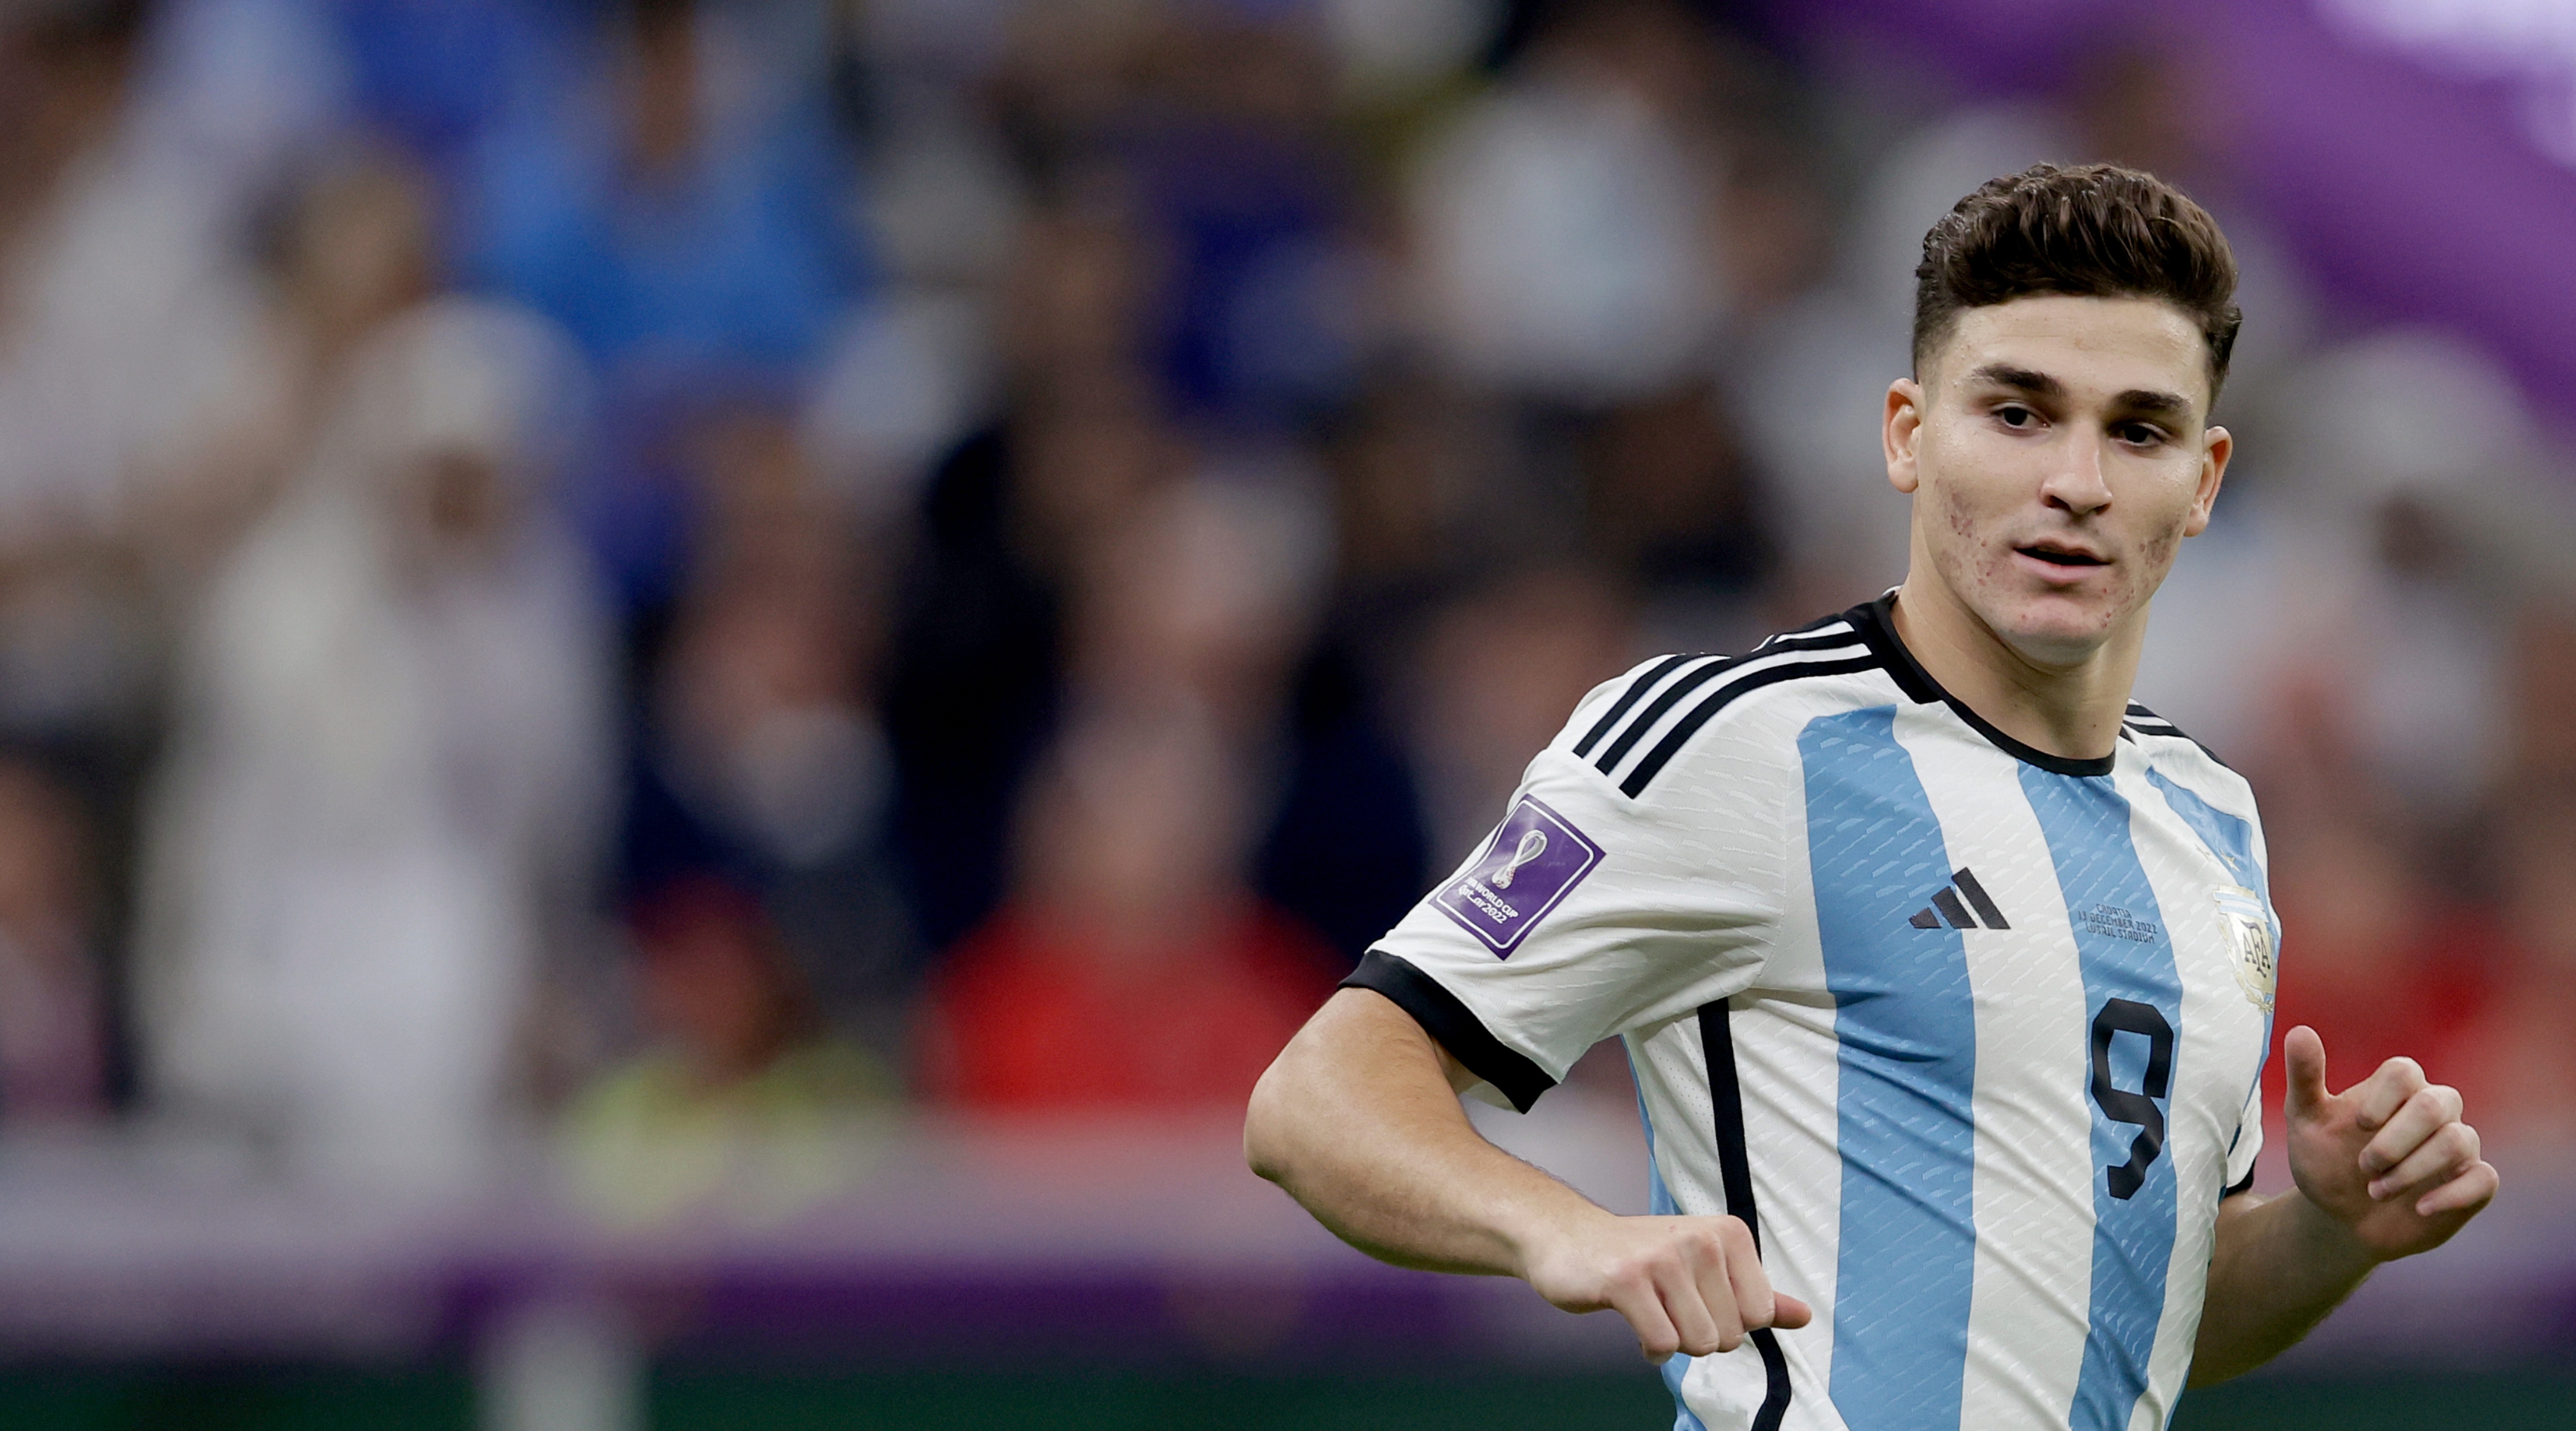 Julian Alvarez of Argentina during the FIFA World Cup 2022 semi-final between Argentina and Croatia on 13 December, 2022 in Lusail, Qatar